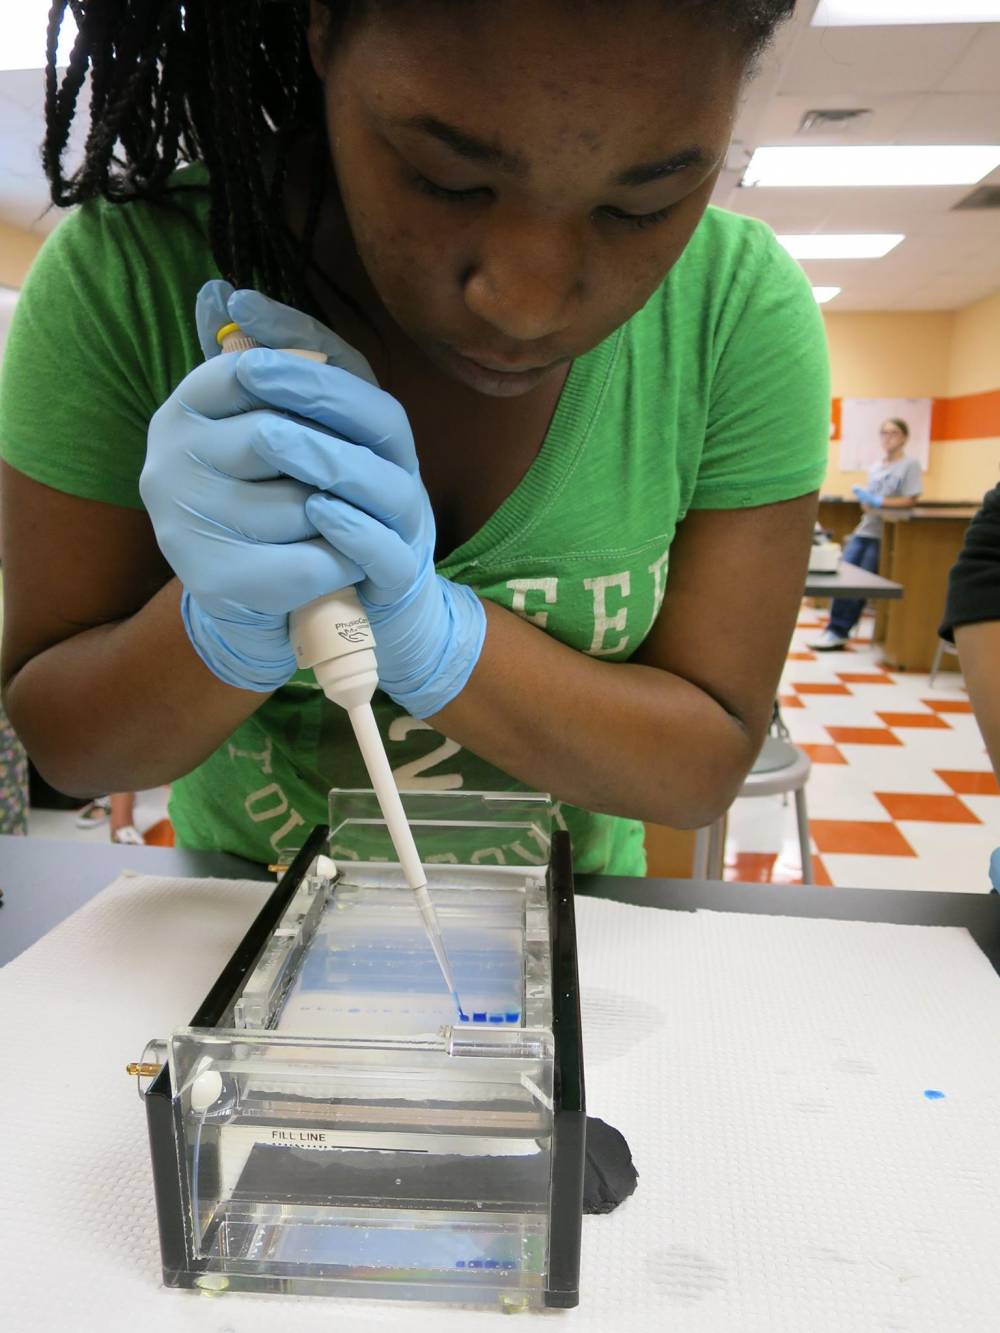 TOP SOUTH CAROLINA SUMMER CAMP: Clemson University Summer Science Camps is a Top Summer Camp located in Clemson South Carolina offering many fun and enriching camp programs. 